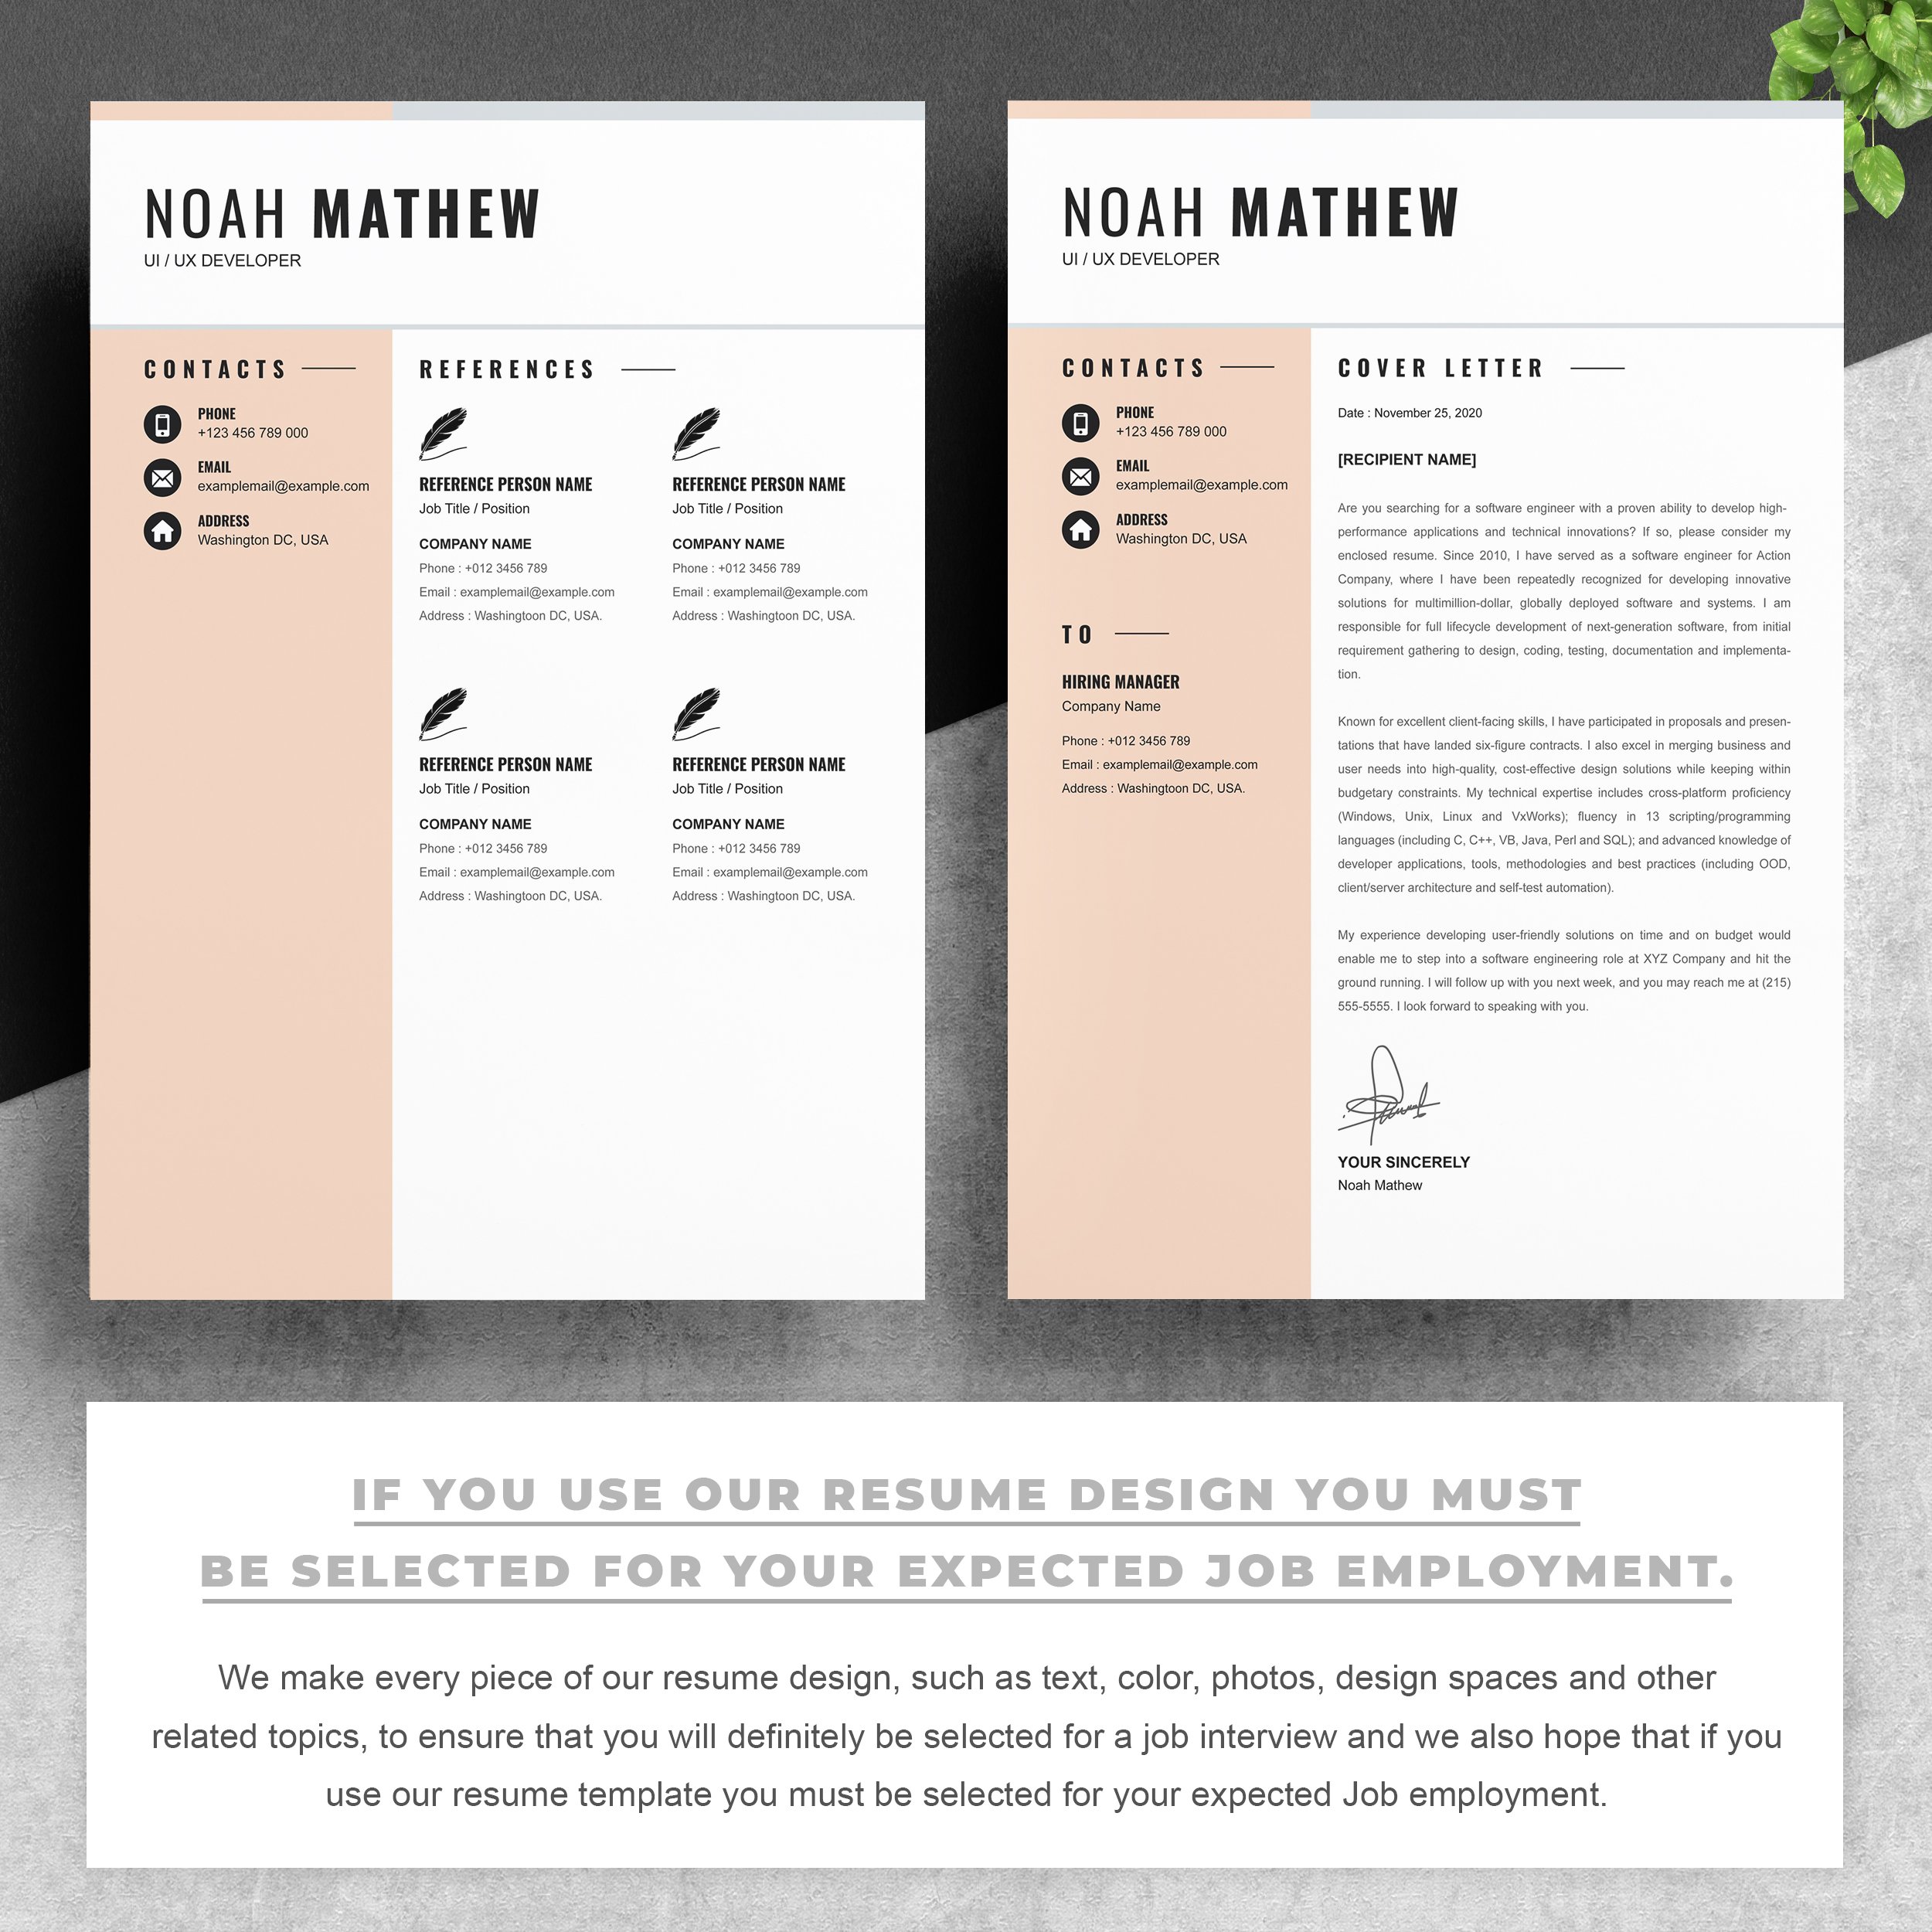 03 2 pages free resume design template copy 802